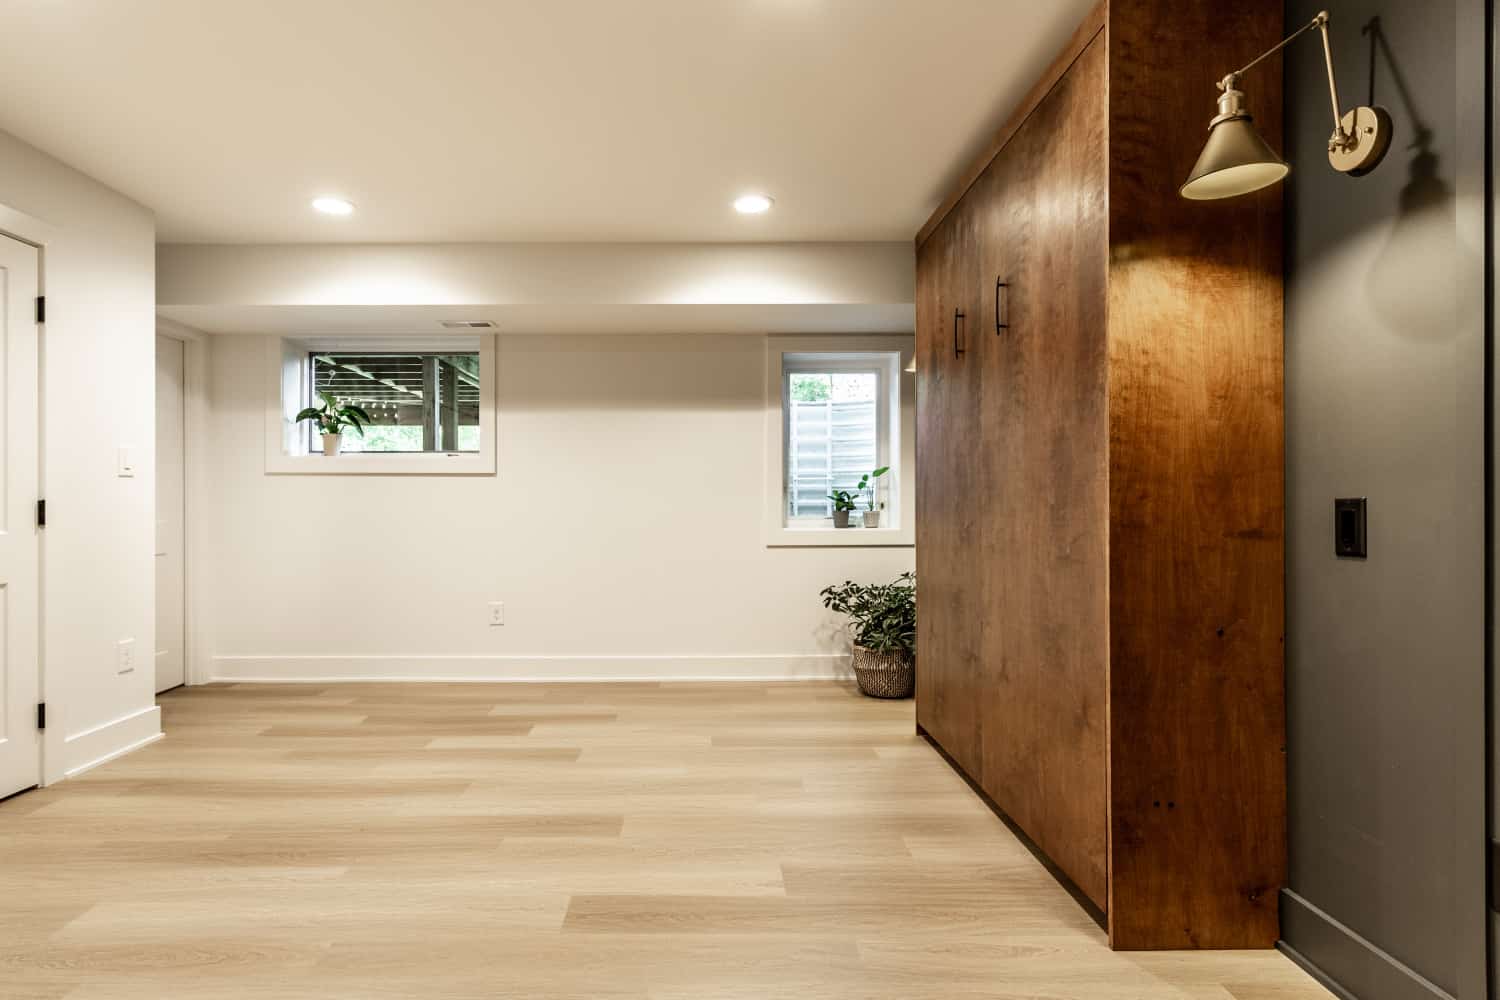 Nicholas Design Build | Remodel: A renovated room with wood floors and a wooden door.